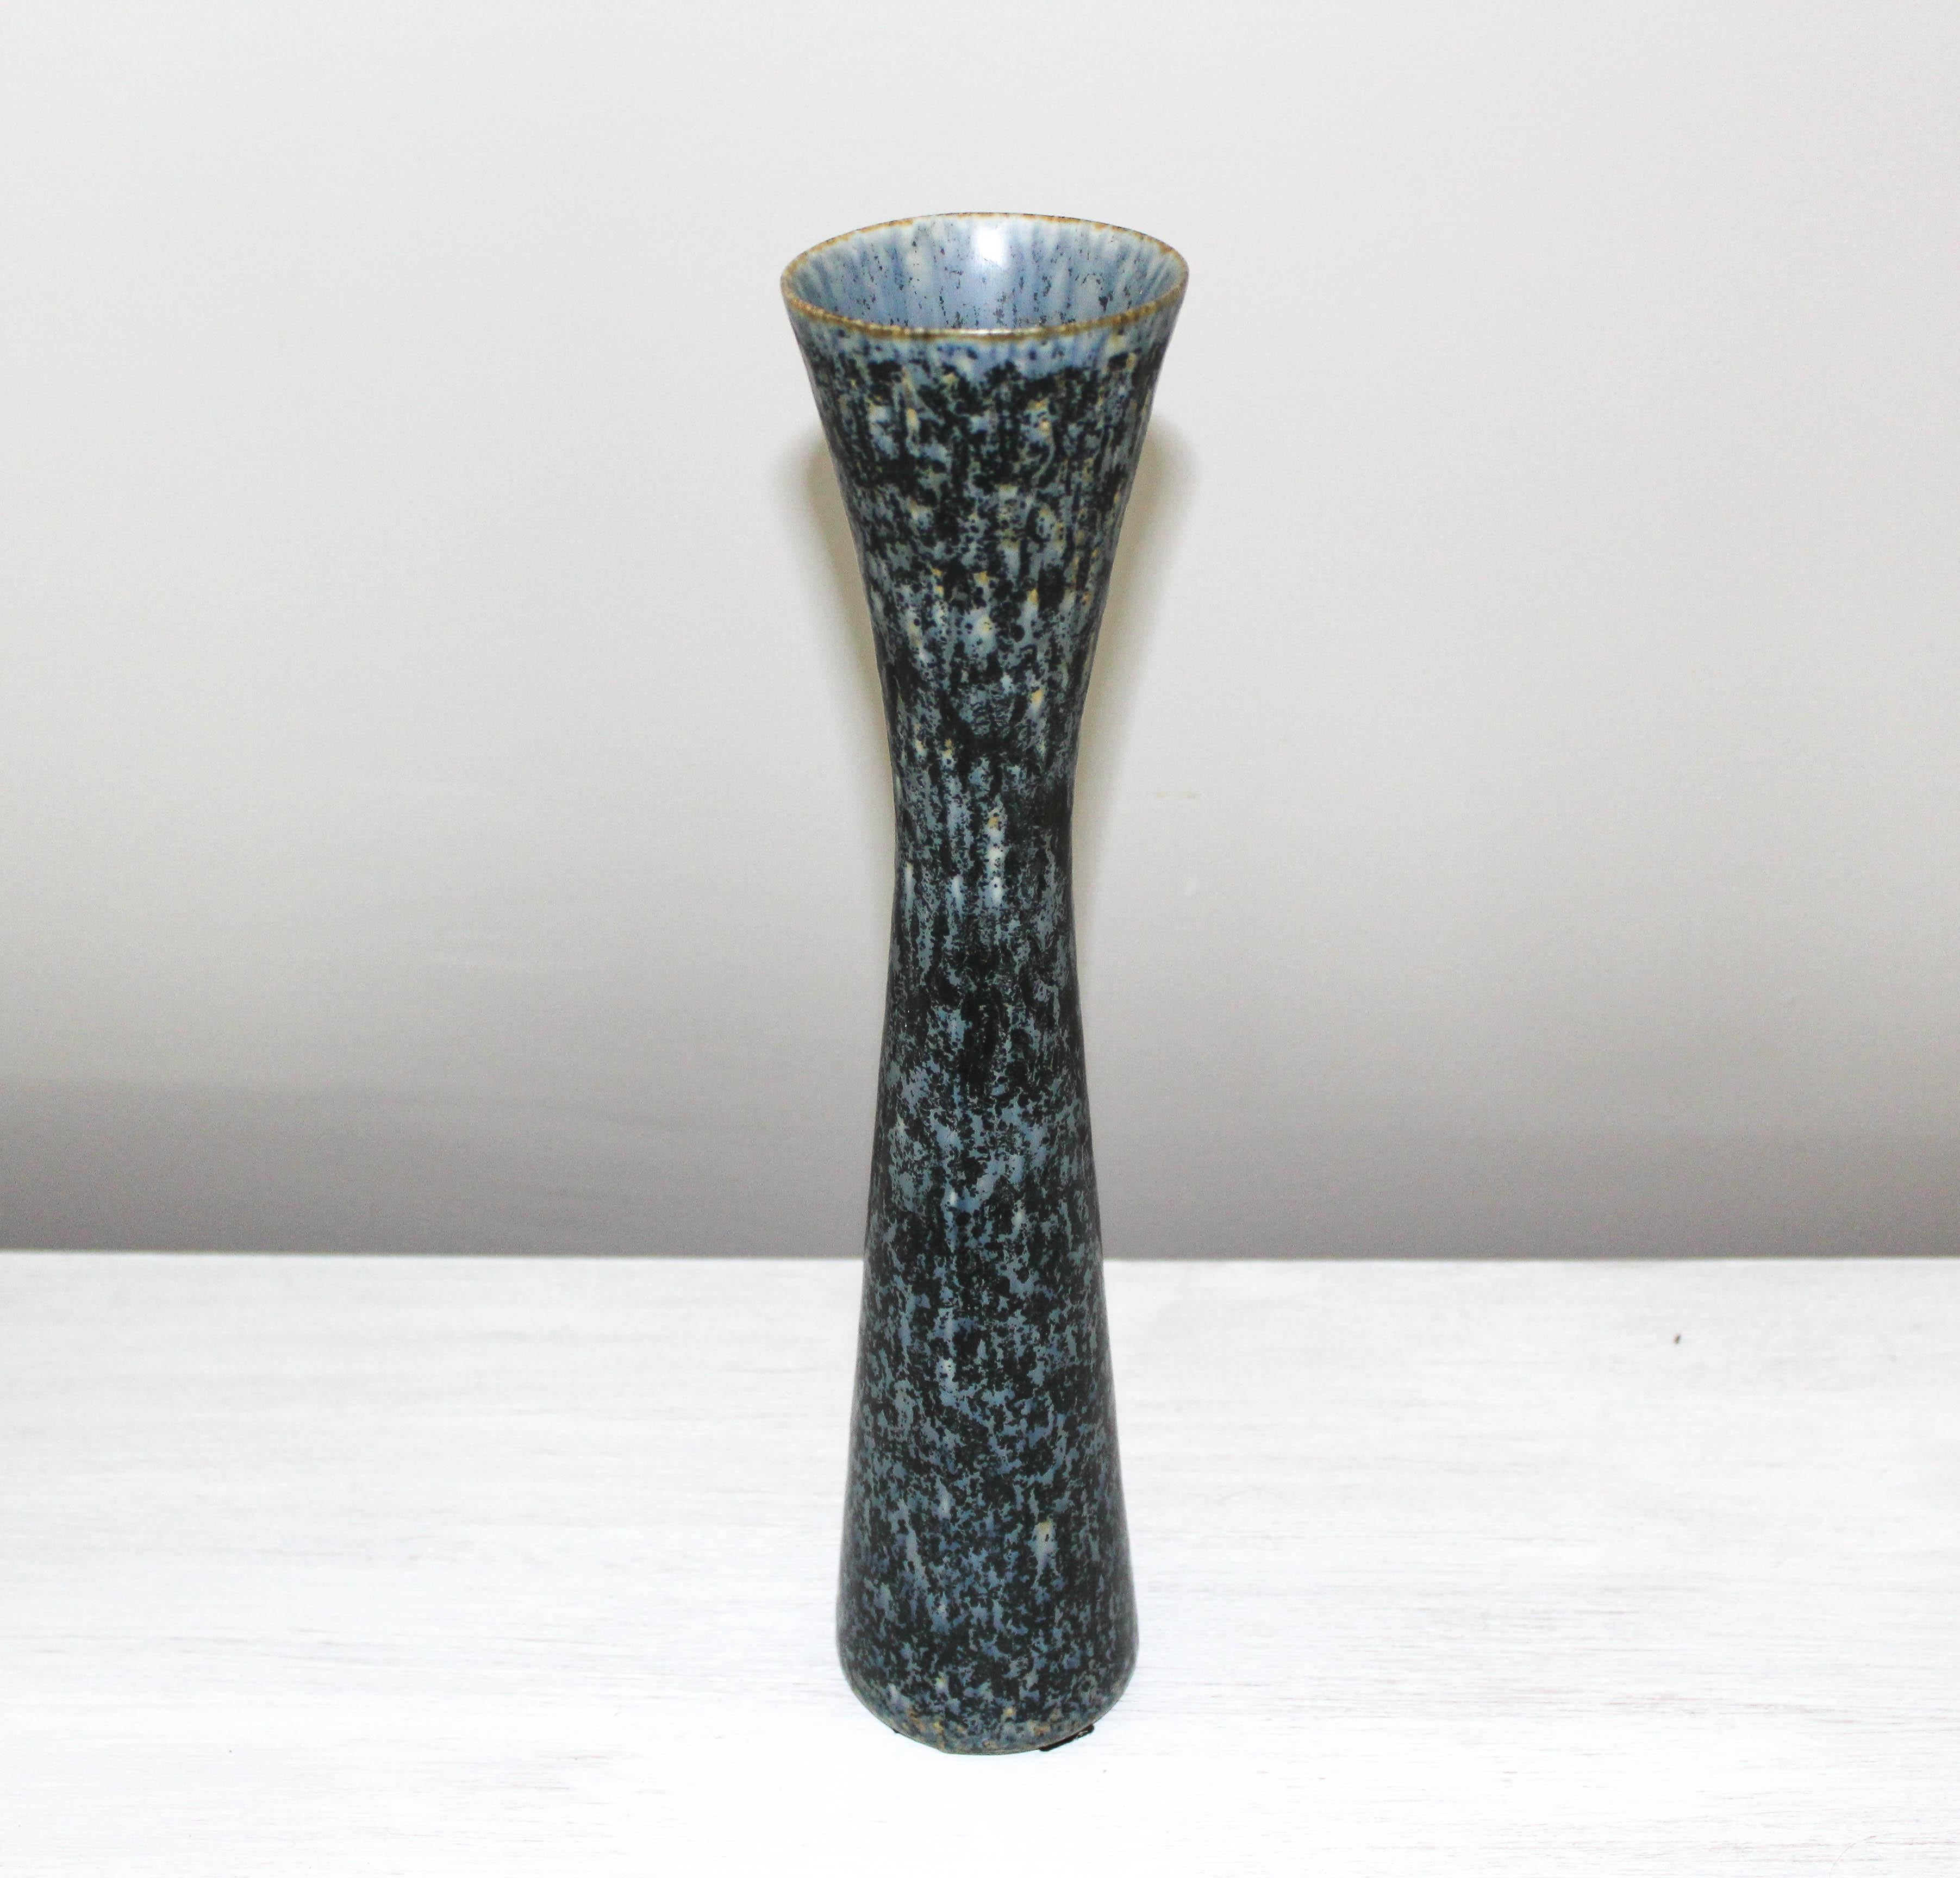 Midcentury Swedish vase by Rörstrand, designed by Carl-Harry Stålhane. This tall and minimalistic vase has a excellent glaze and is in very good vintage condition.